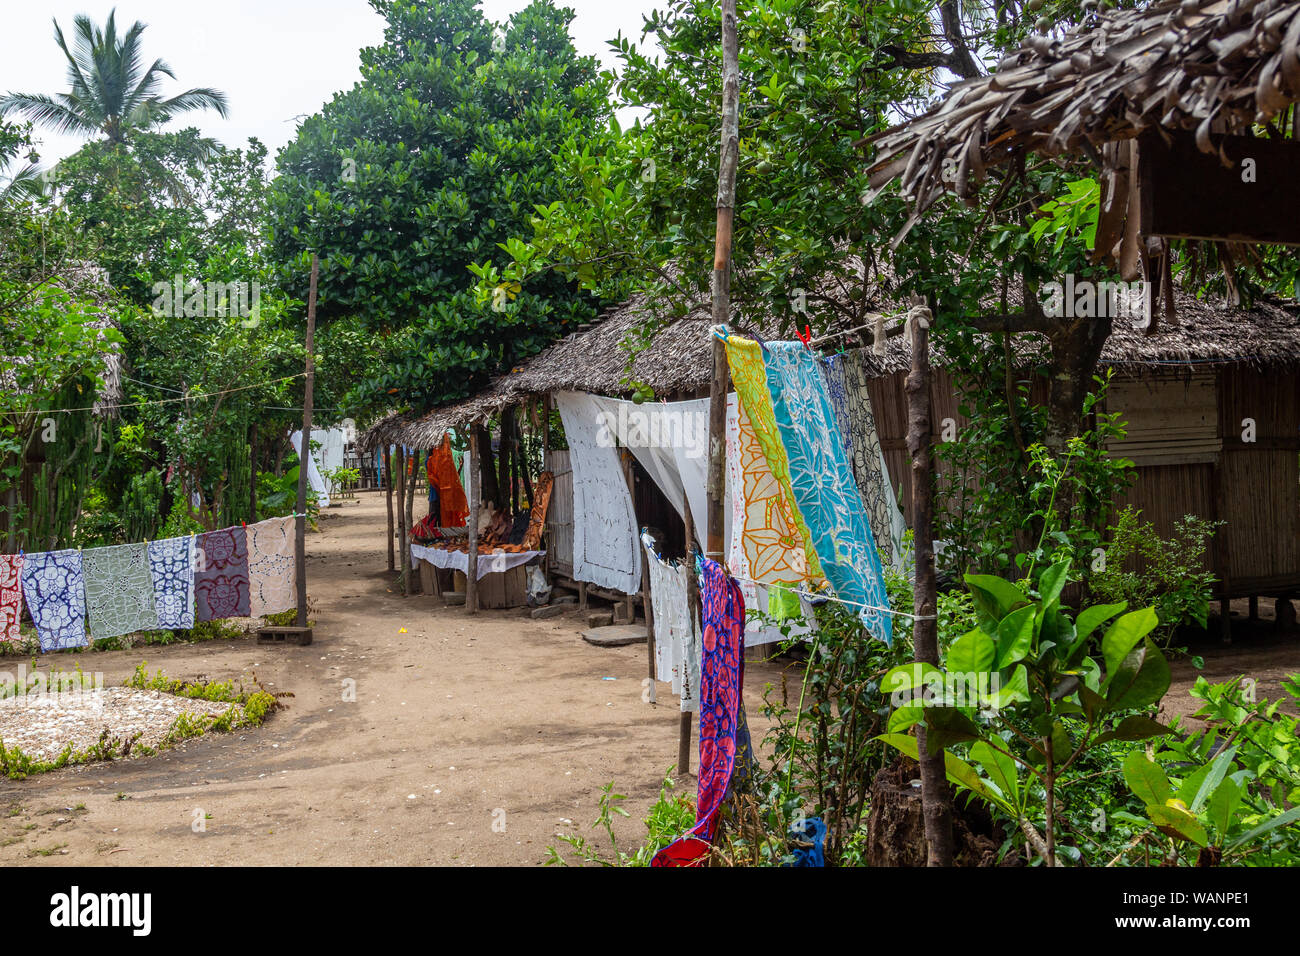 Village with wooden cottages and colorful towels for sale at Lokobe nature strict reserve in Madagascar, Nosy Be, Africa Stock Photo